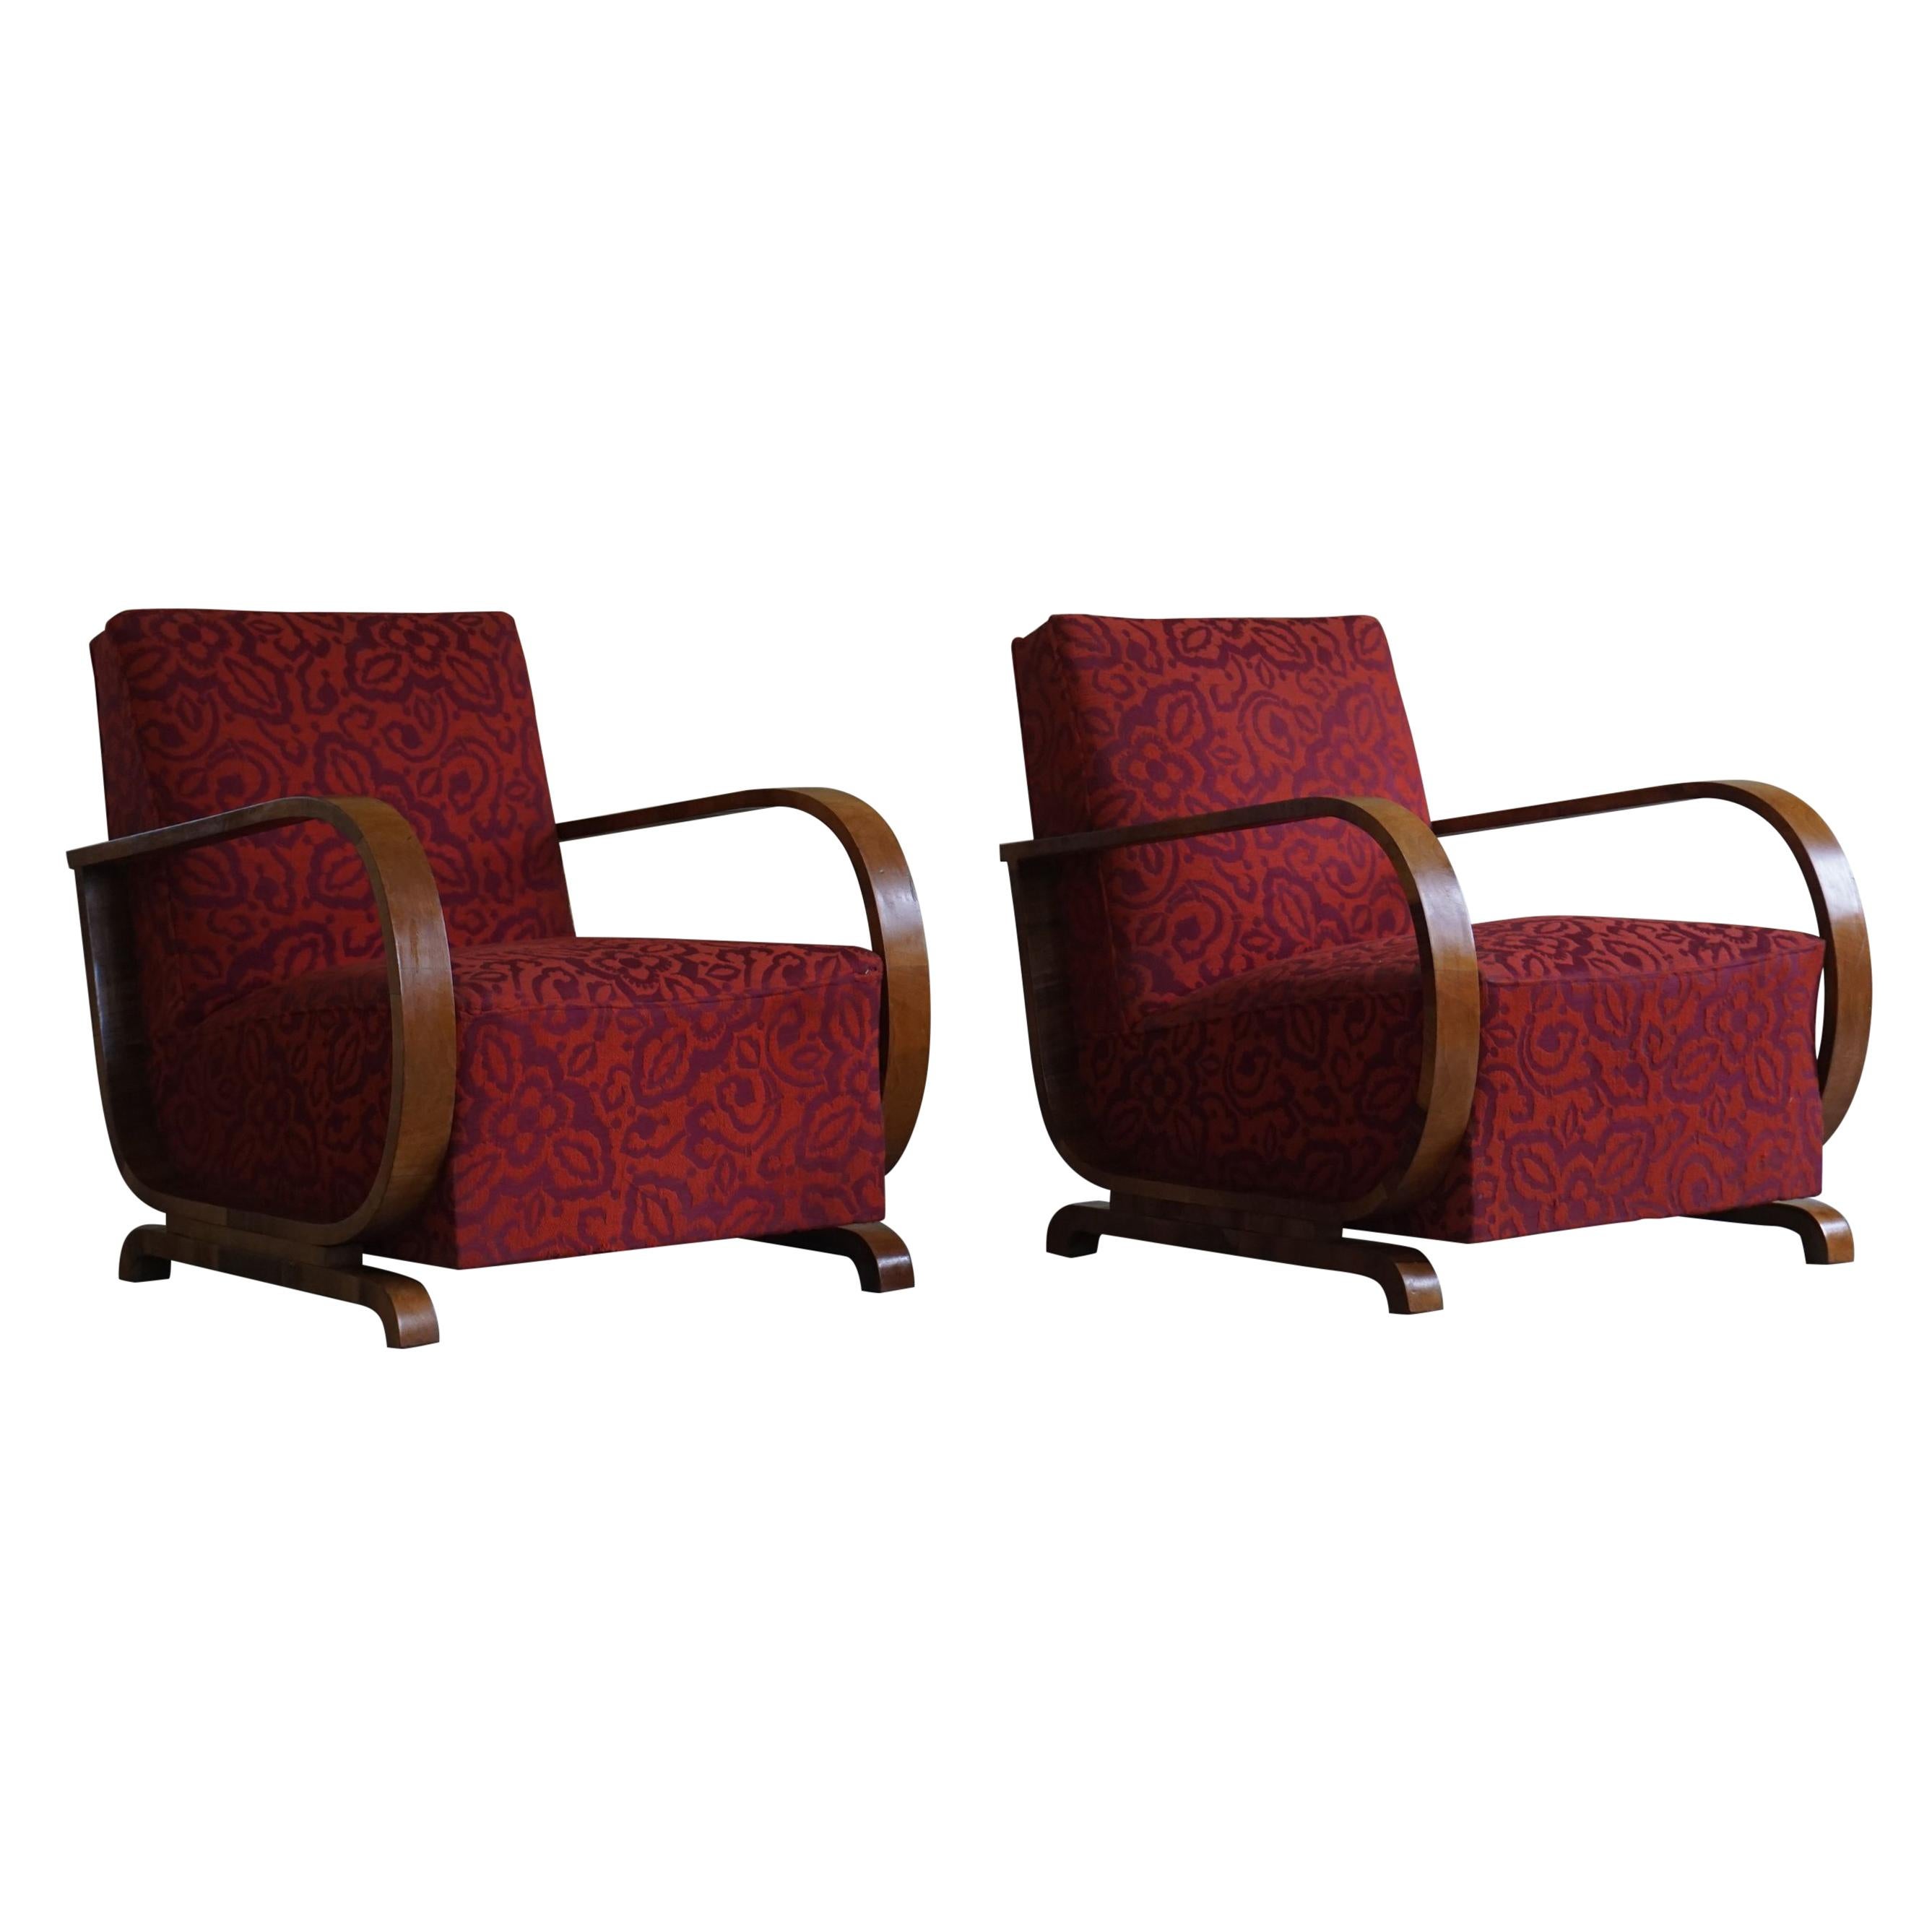 Pair of Danish Curved Art Deco Lounge Chairs, Armrest in Walnut, 1930s